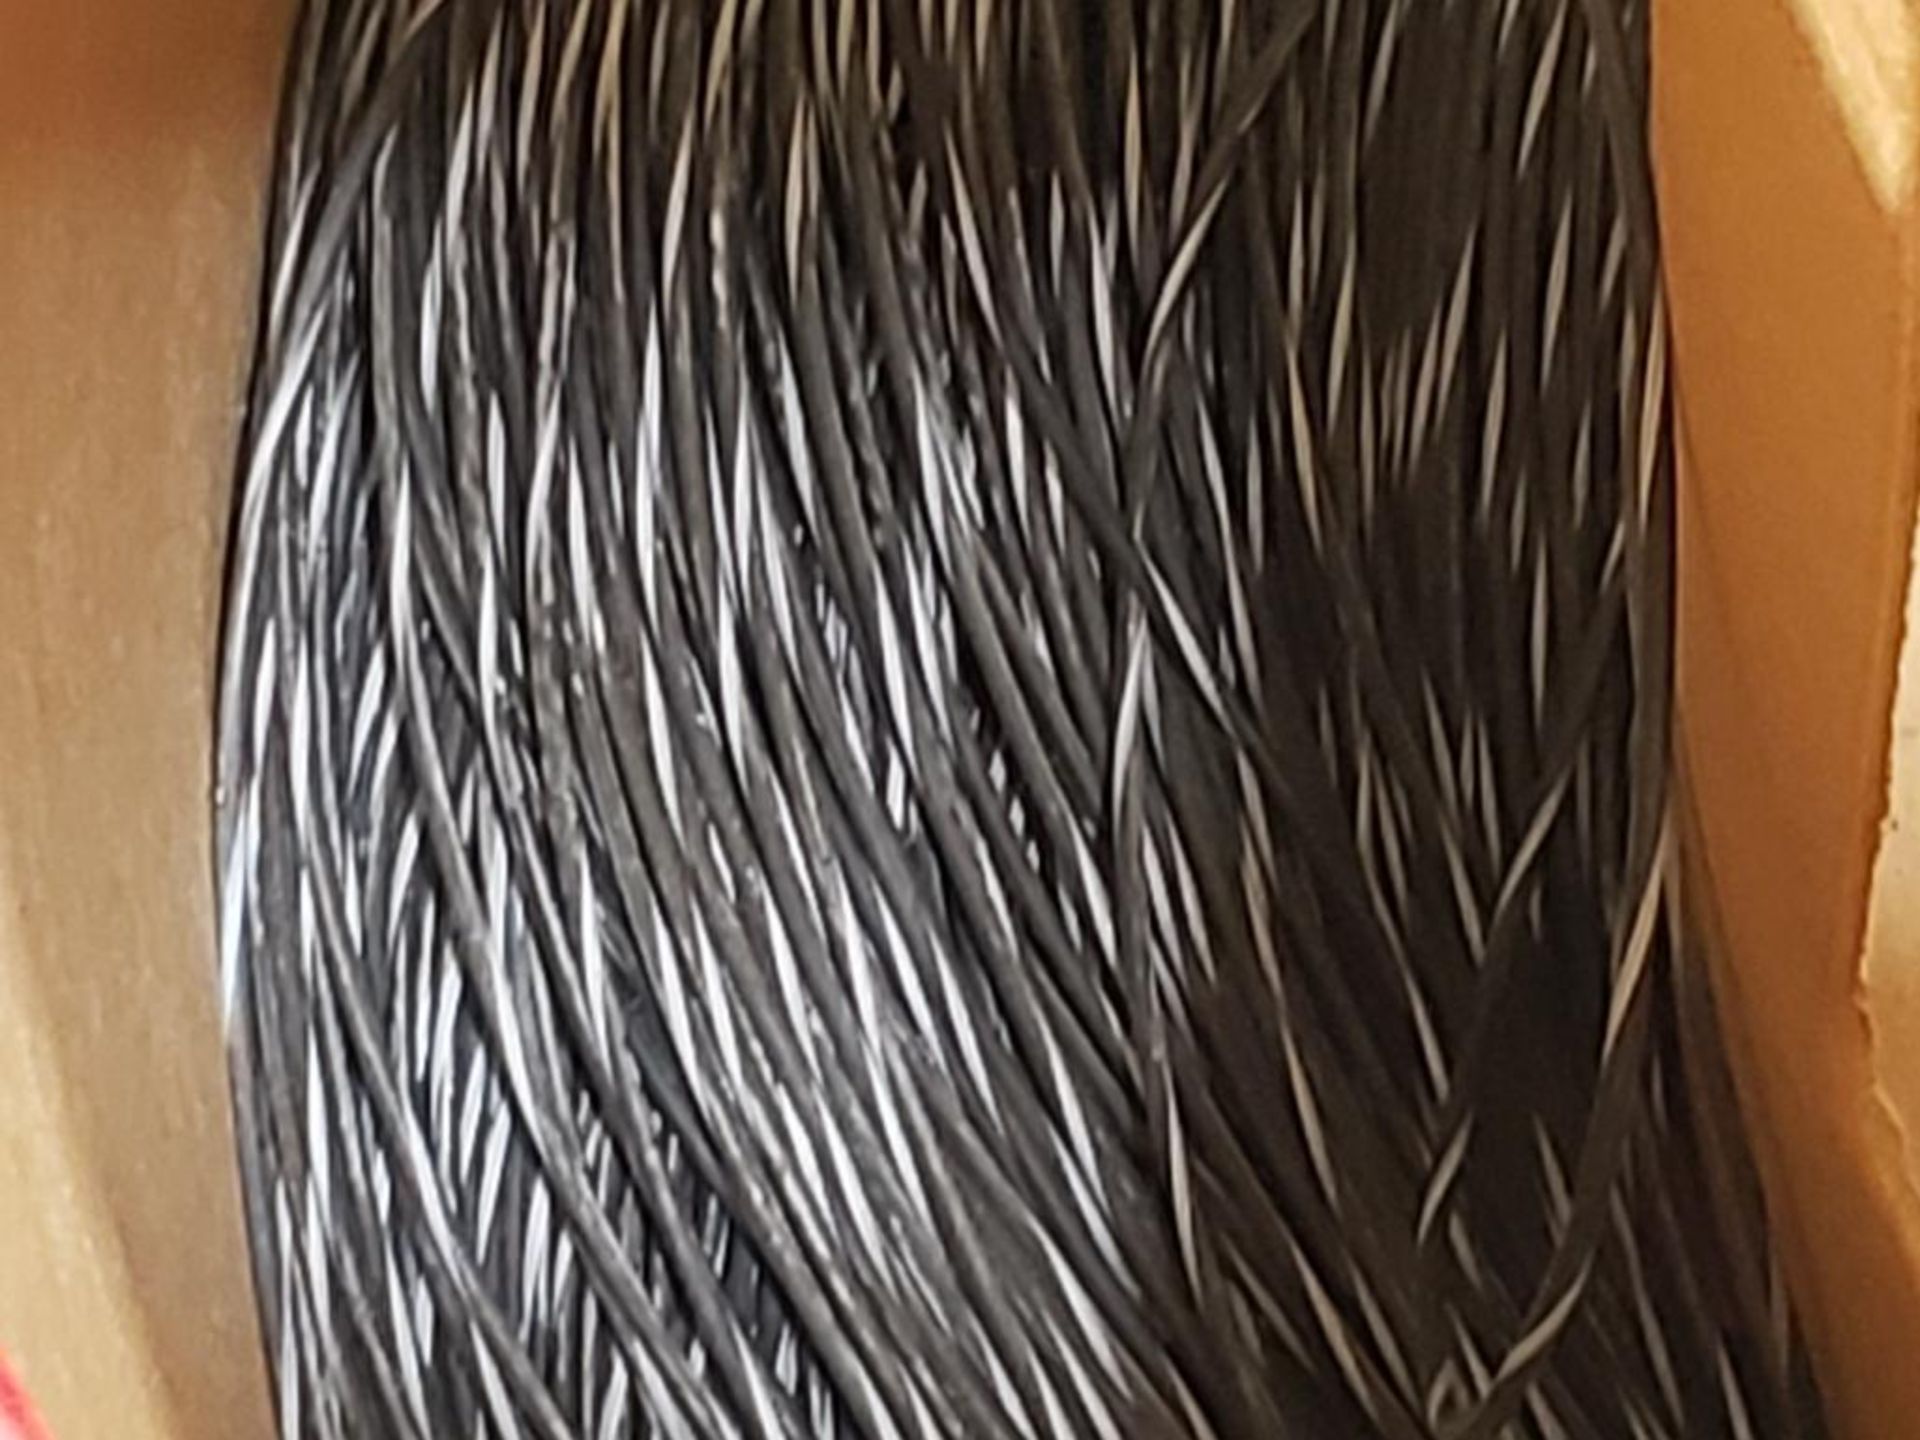 16 awg black / white print copper wire. Gross barrel weight, 79lbs. Partial barrel. - Image 2 of 4